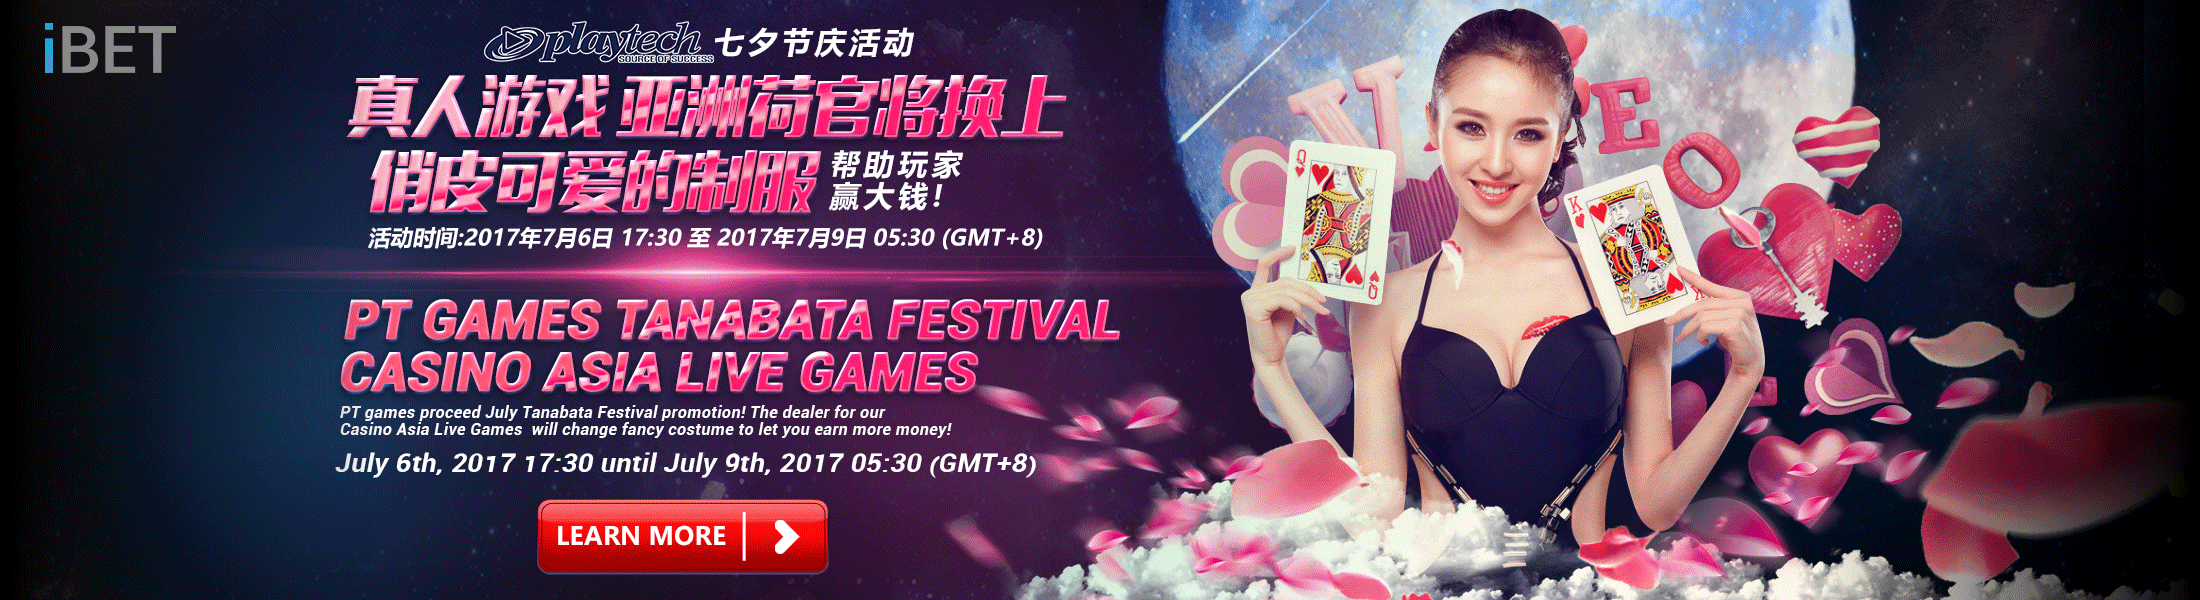 Casino Malaysia PT Live Game Tanabata Festival in iBET